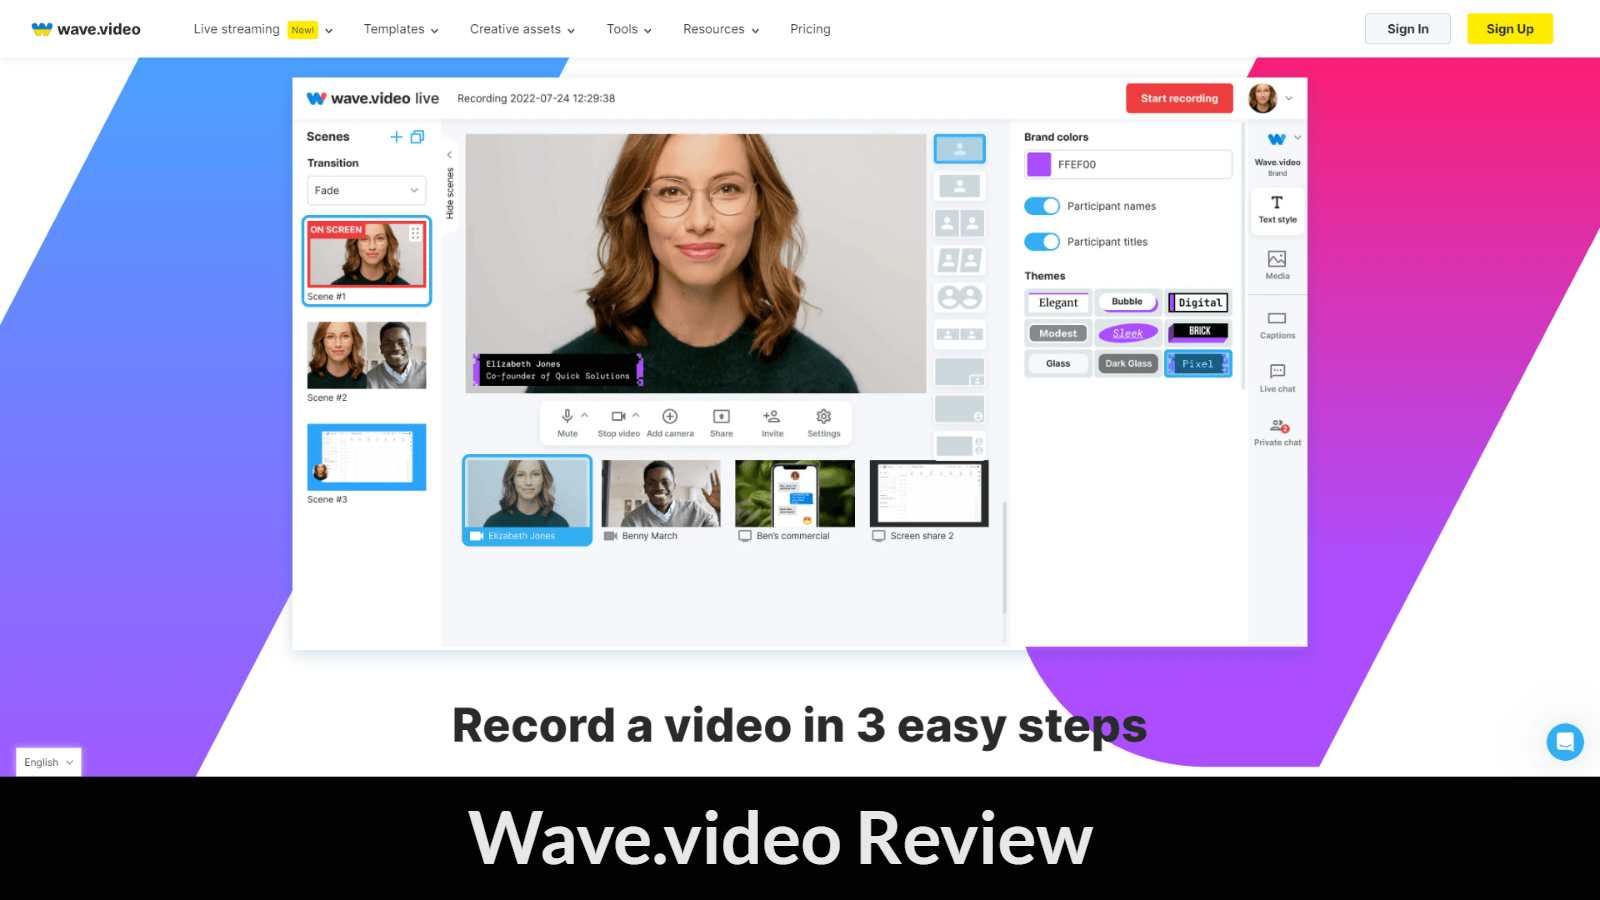 Wave video Review